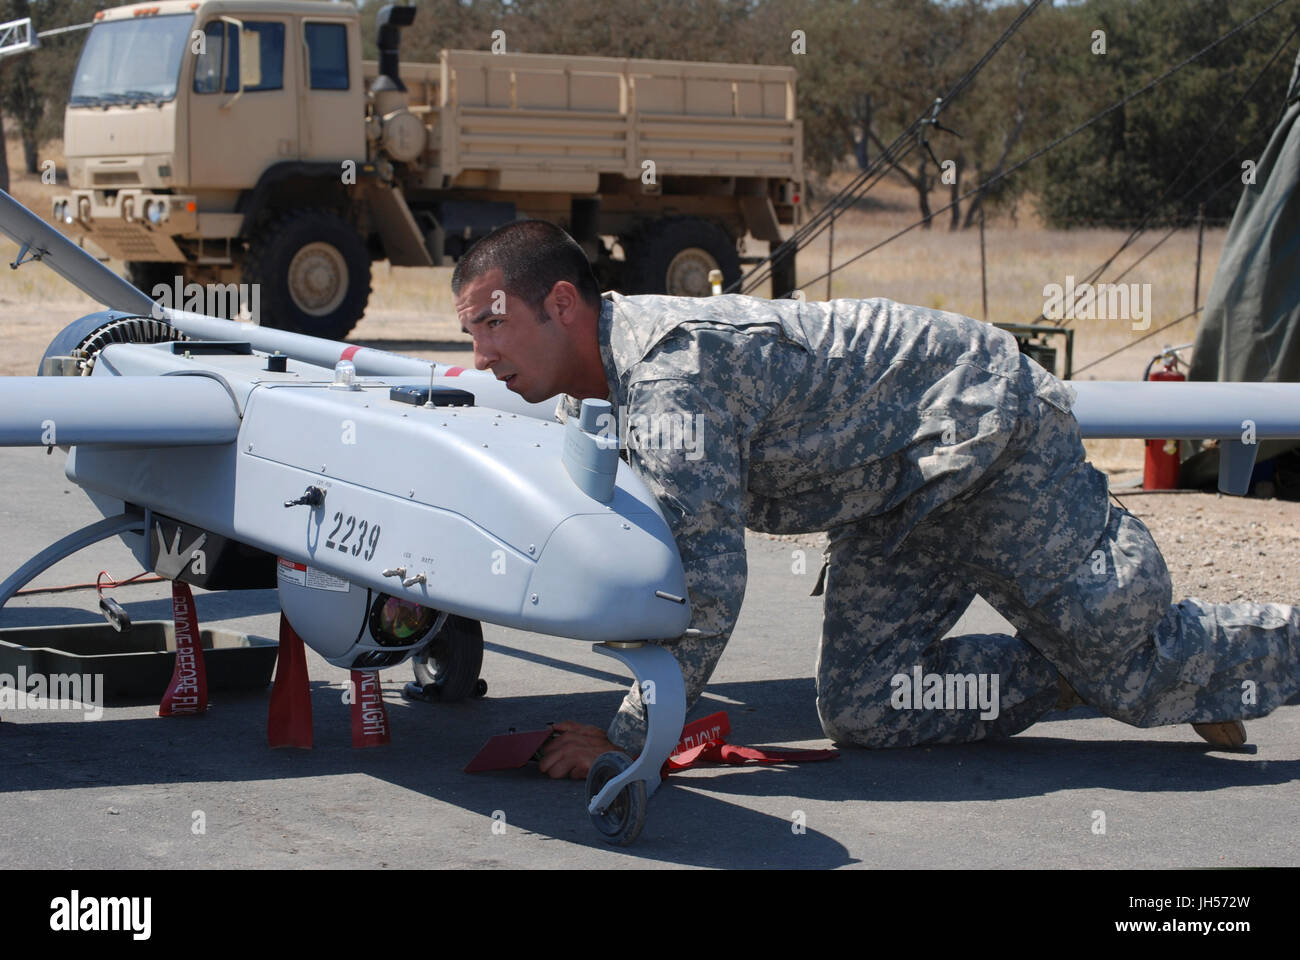 US military drones and unmanned aerial vehicles - UAV's Stock Photo